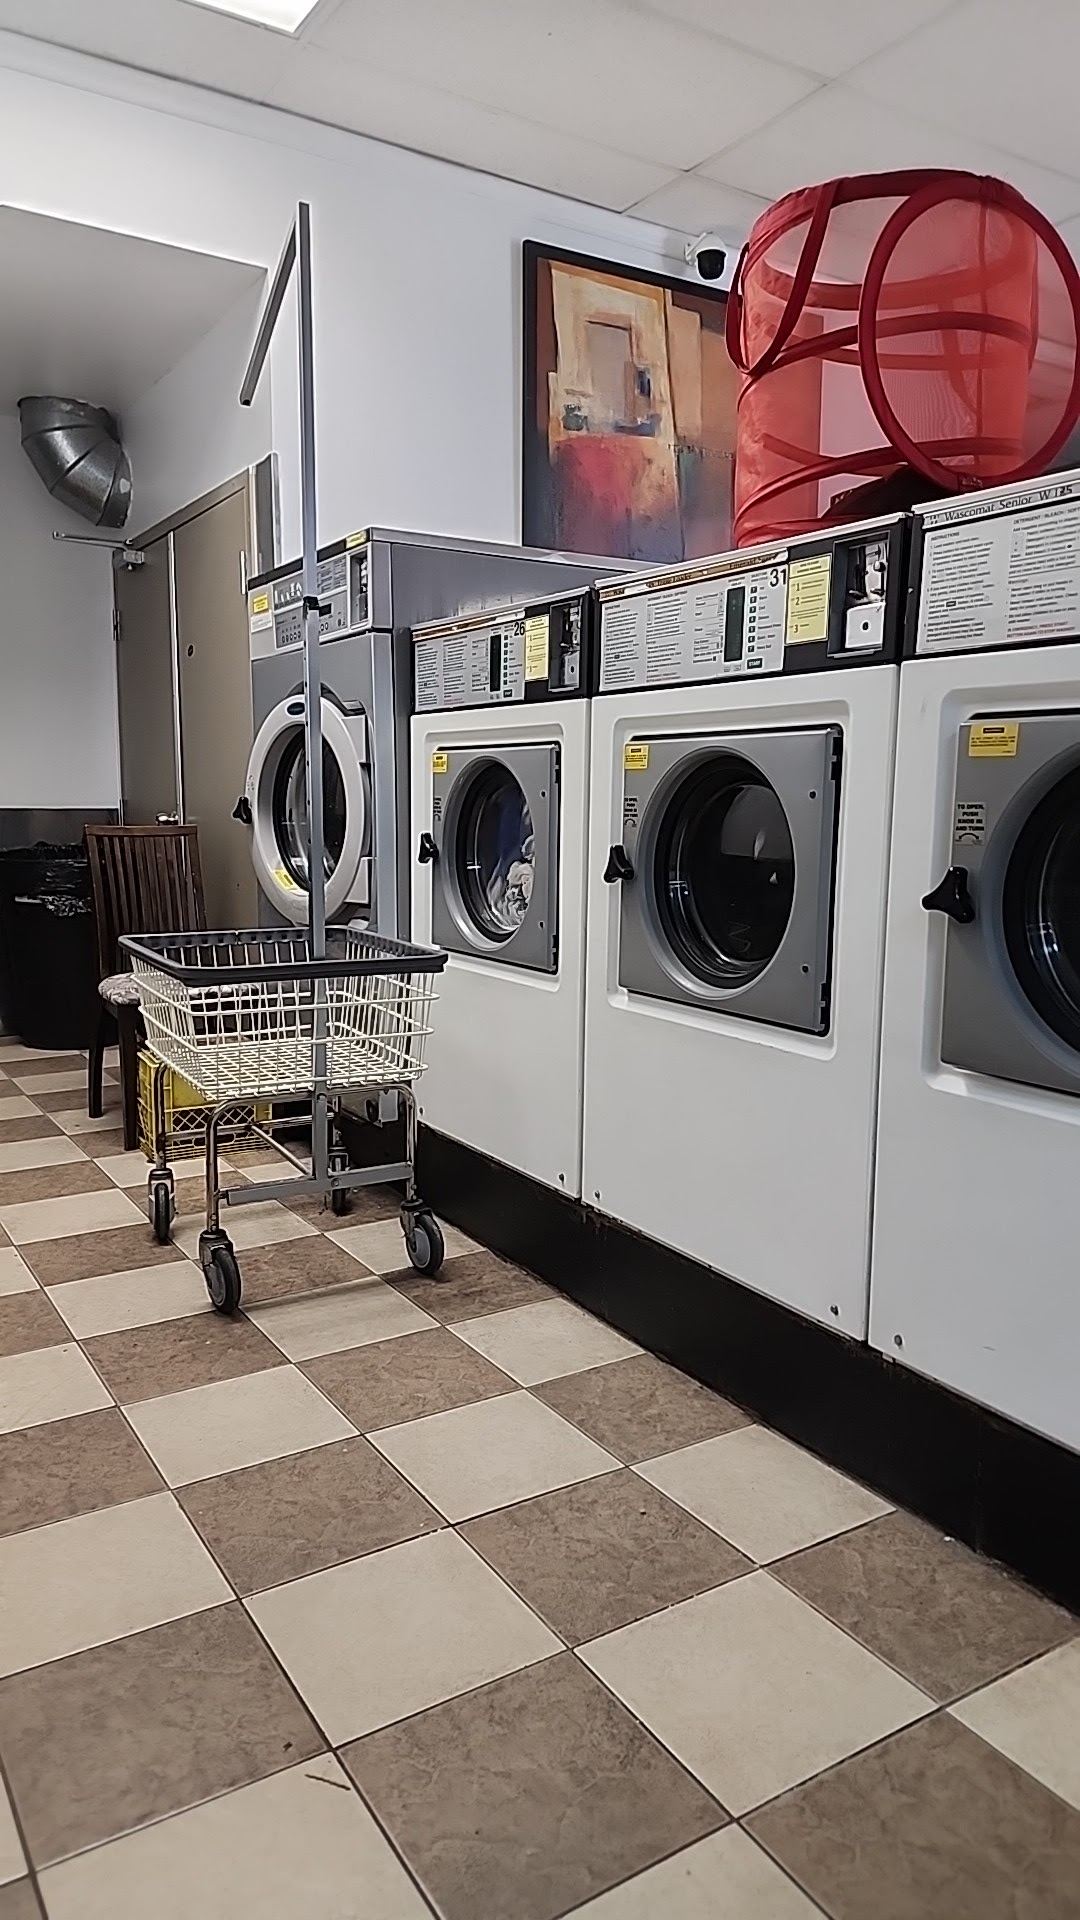 Easy Kleen Coin Laundromat and Dry Cleaning